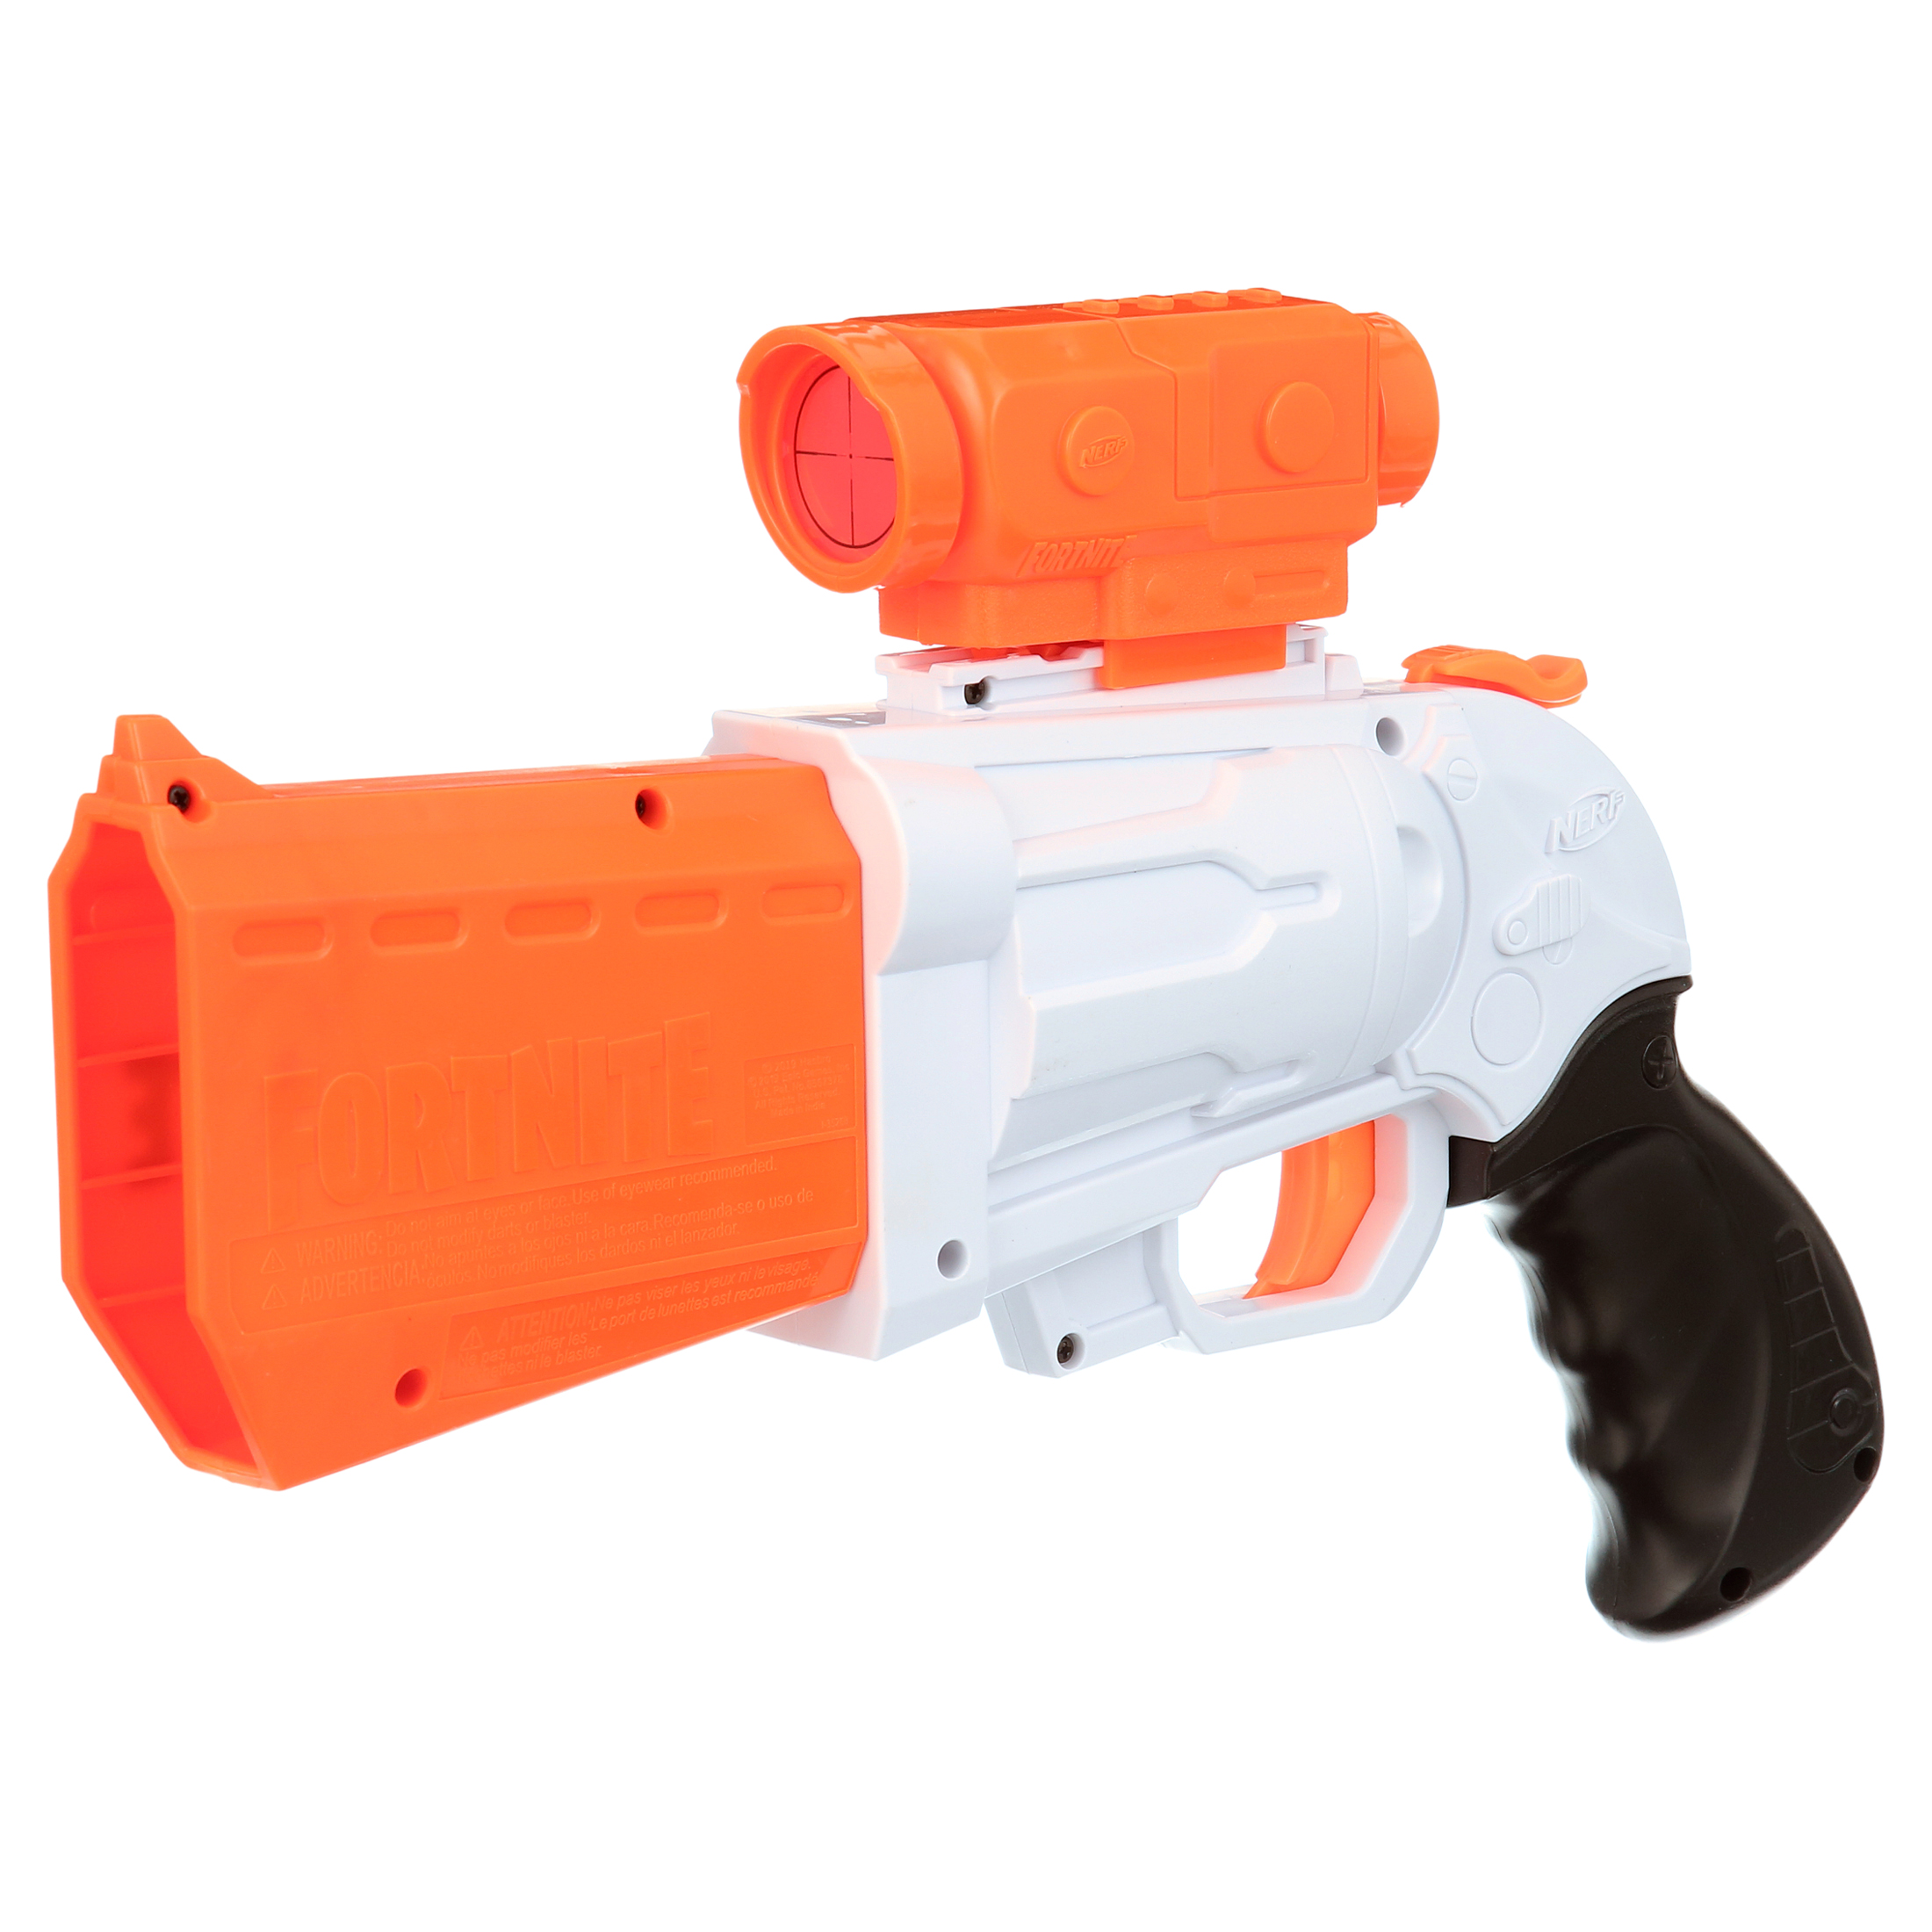 Nerf Fortnite SR Blaster, Includes 8 Official Nerf Darts, for Kids Ages 8 and Up - image 5 of 7